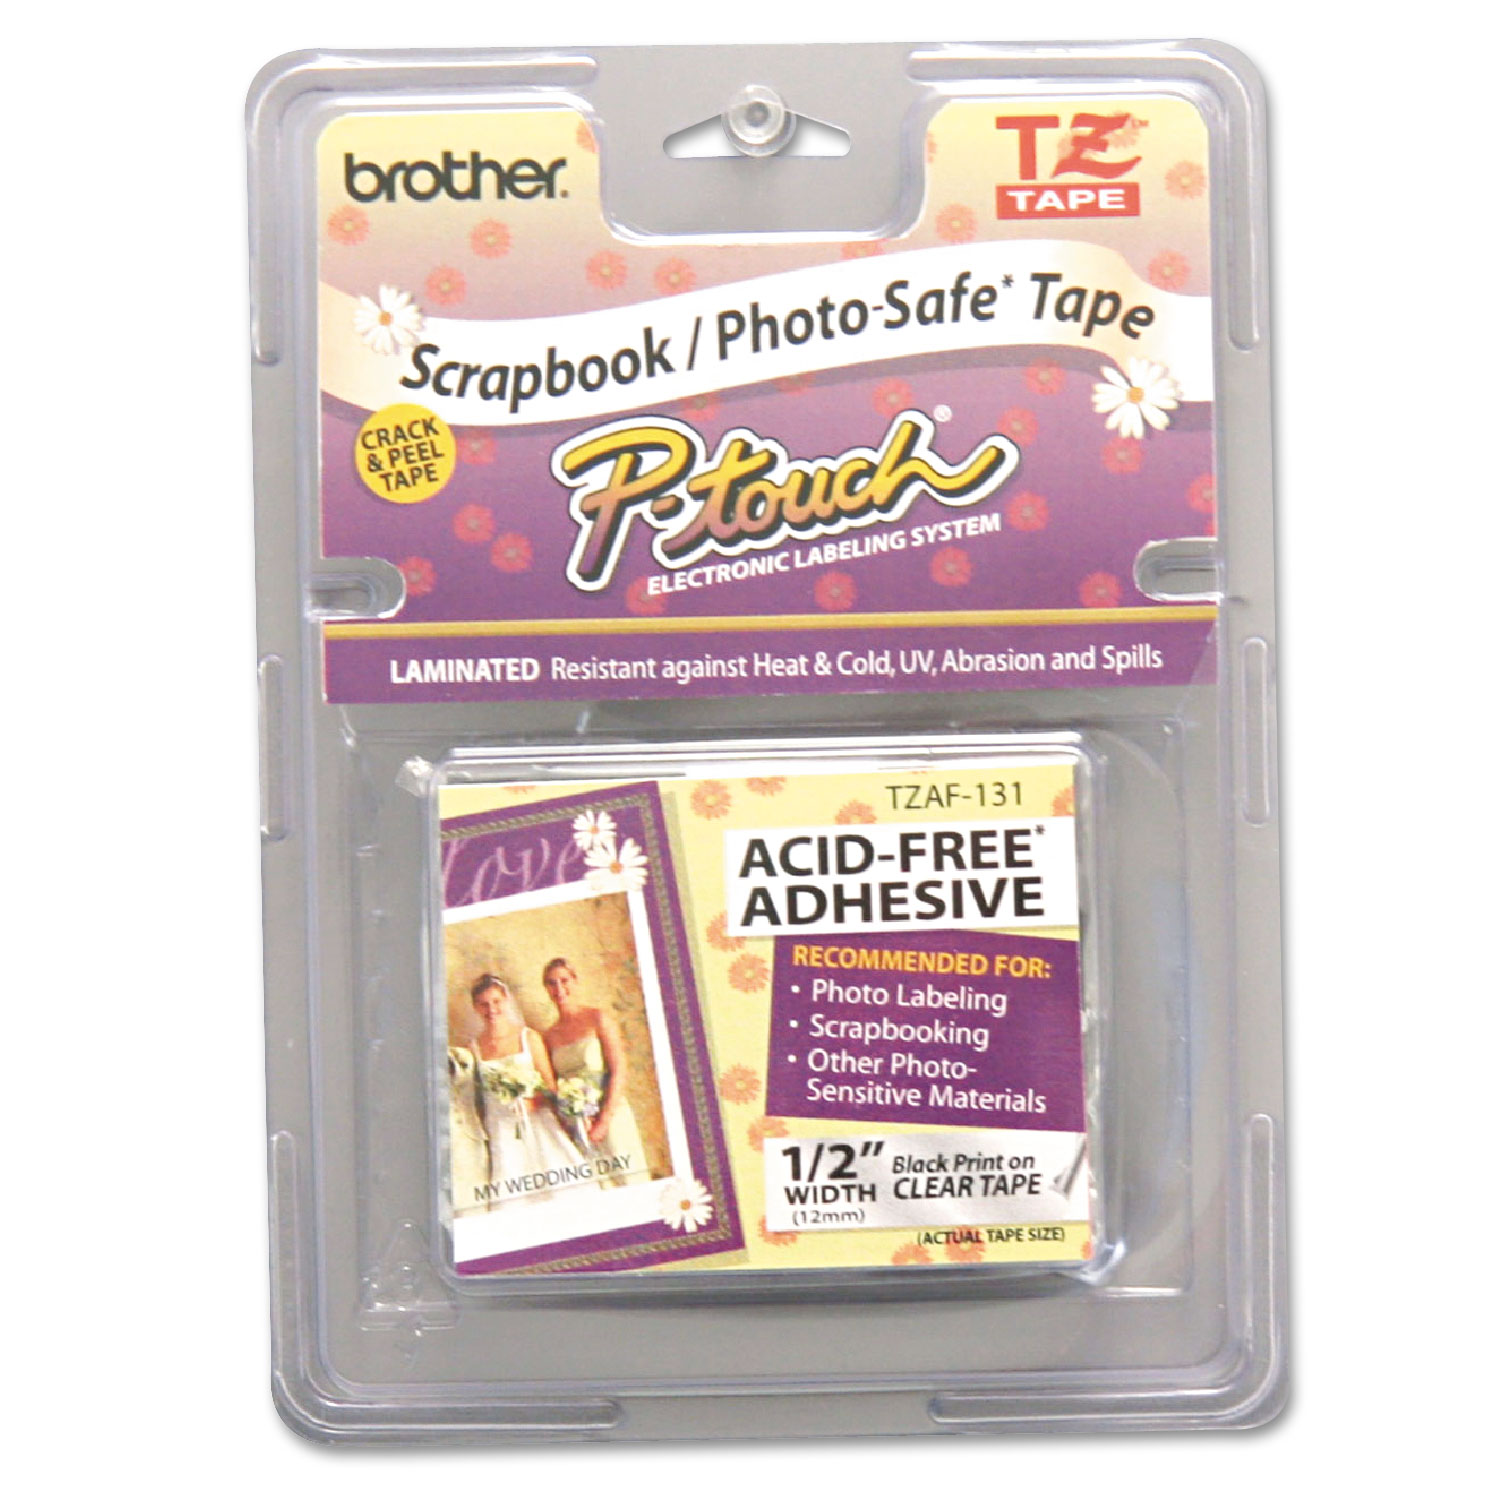 TZ Photo-Safe Tape Cartridge for P-Touch Labelers, 1/2w, Black on White